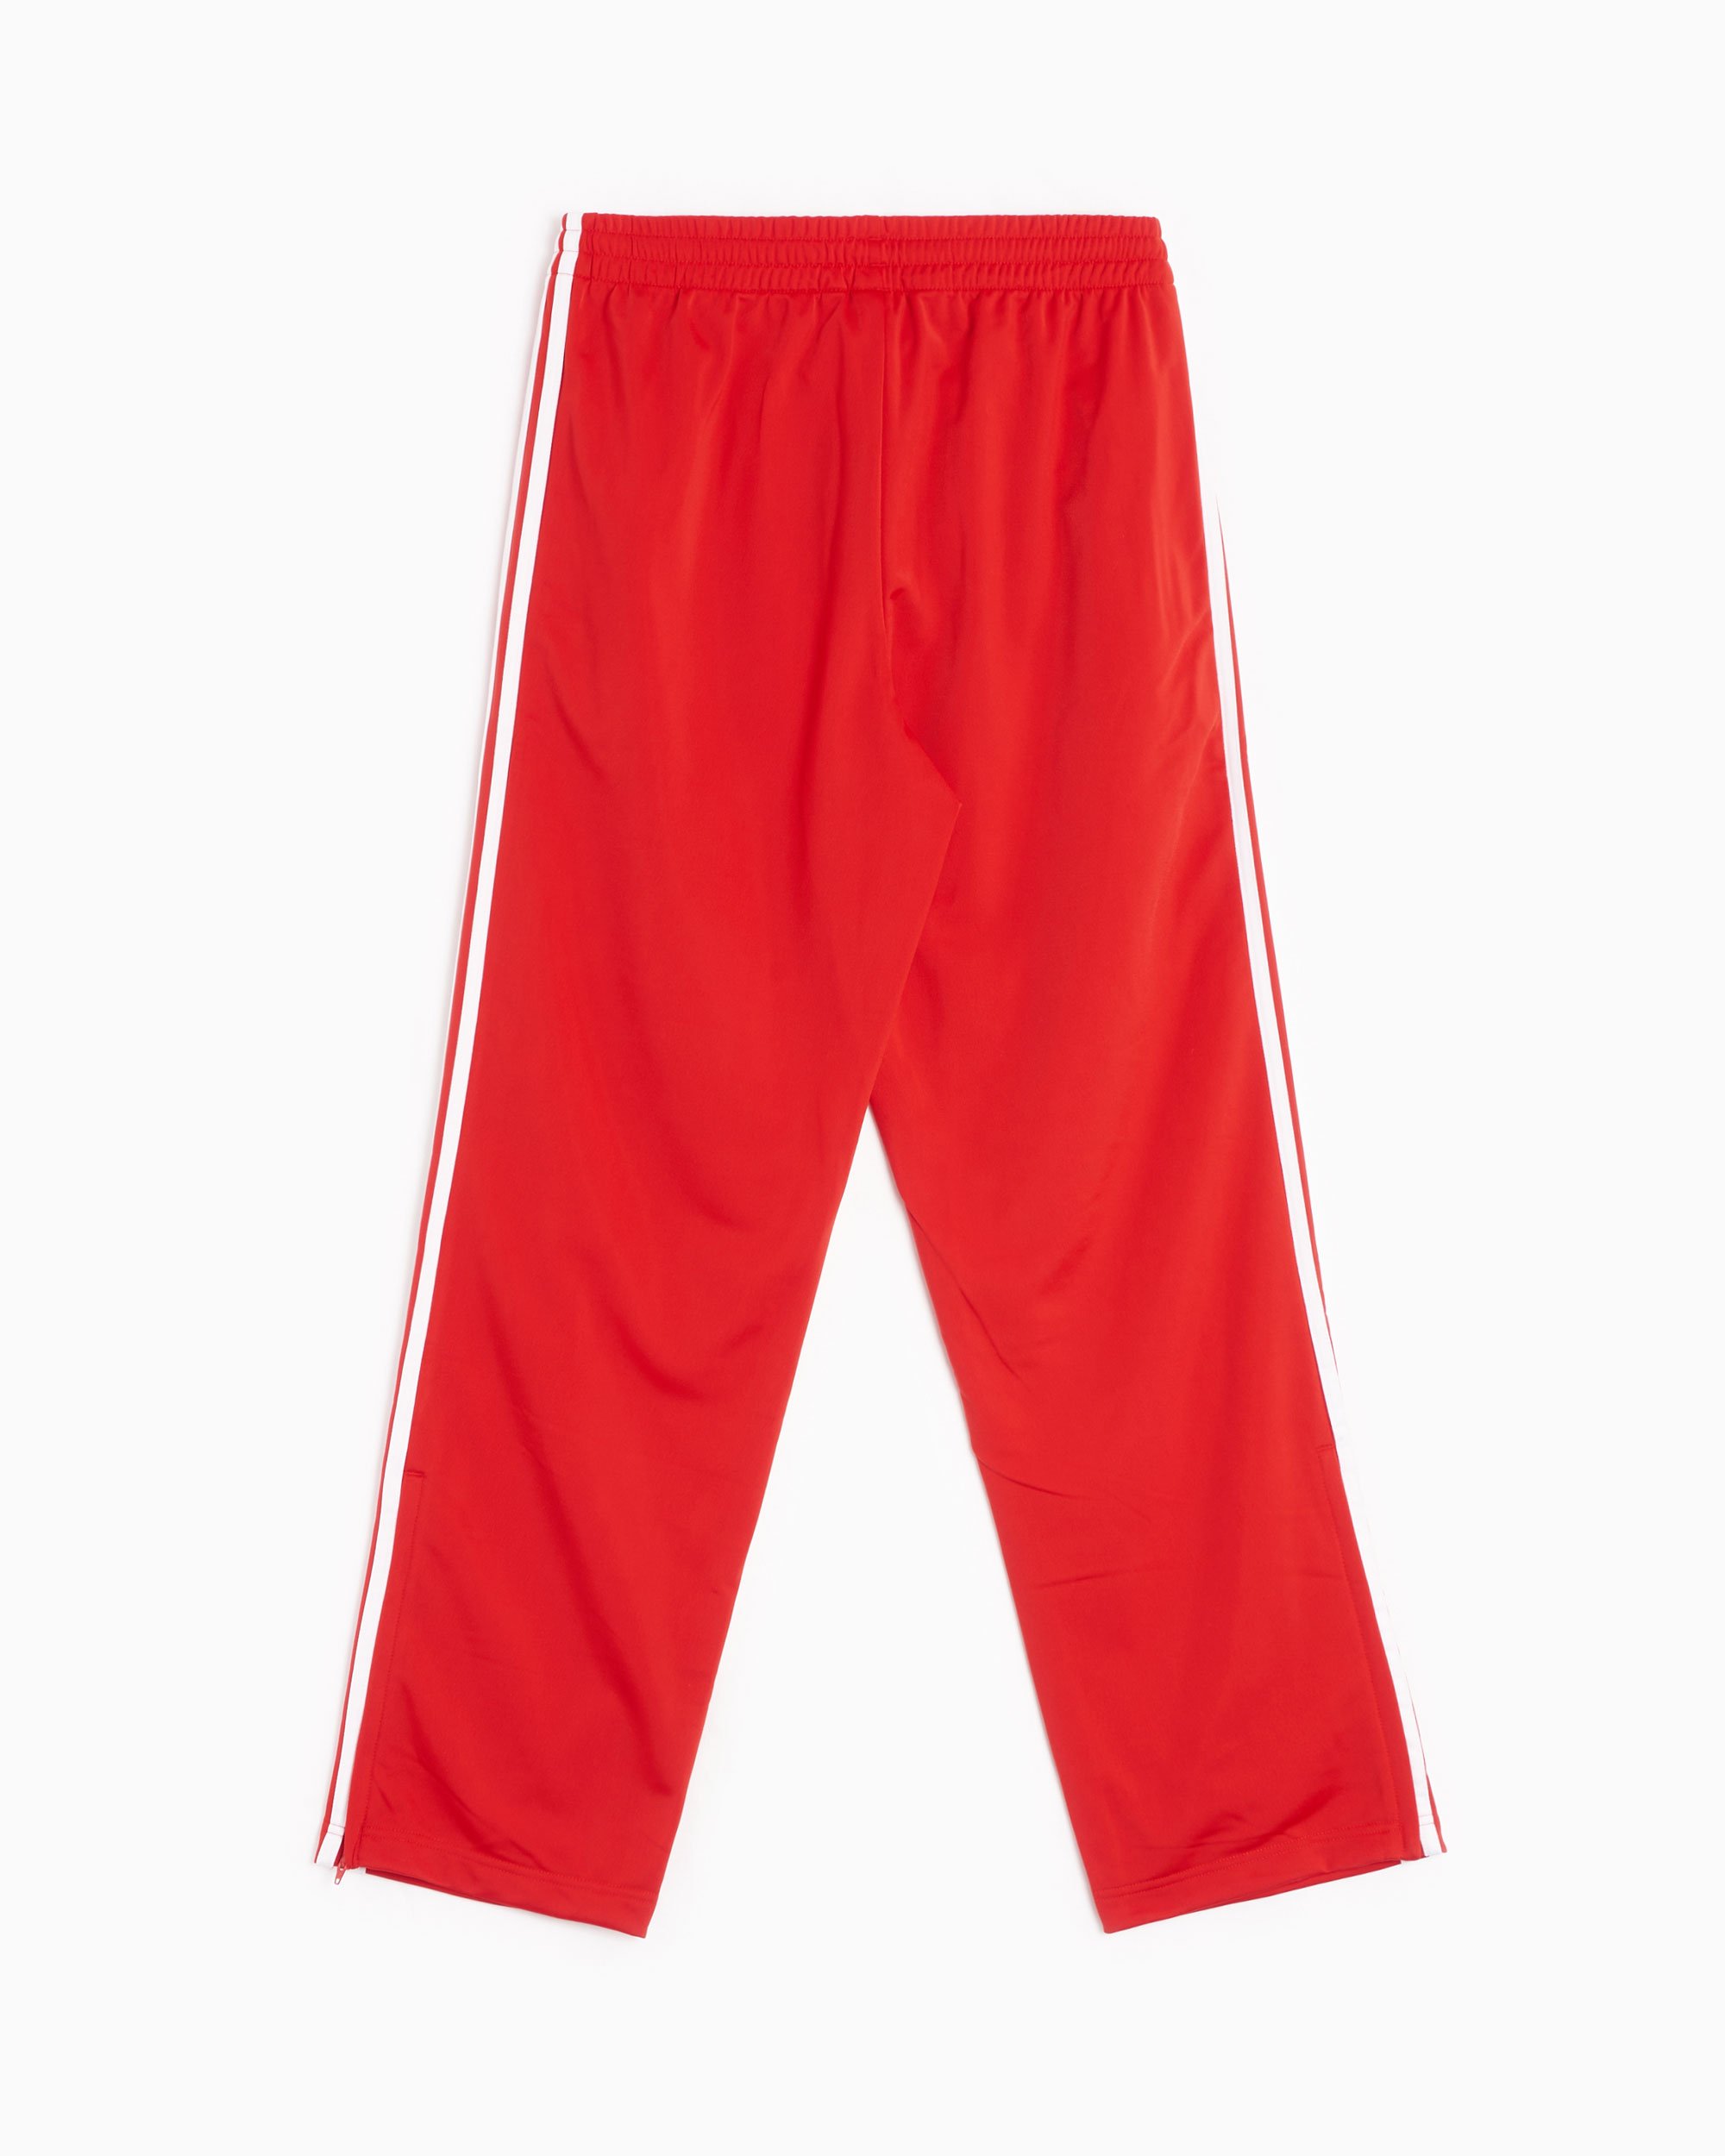 Red Pants | adidas Canada